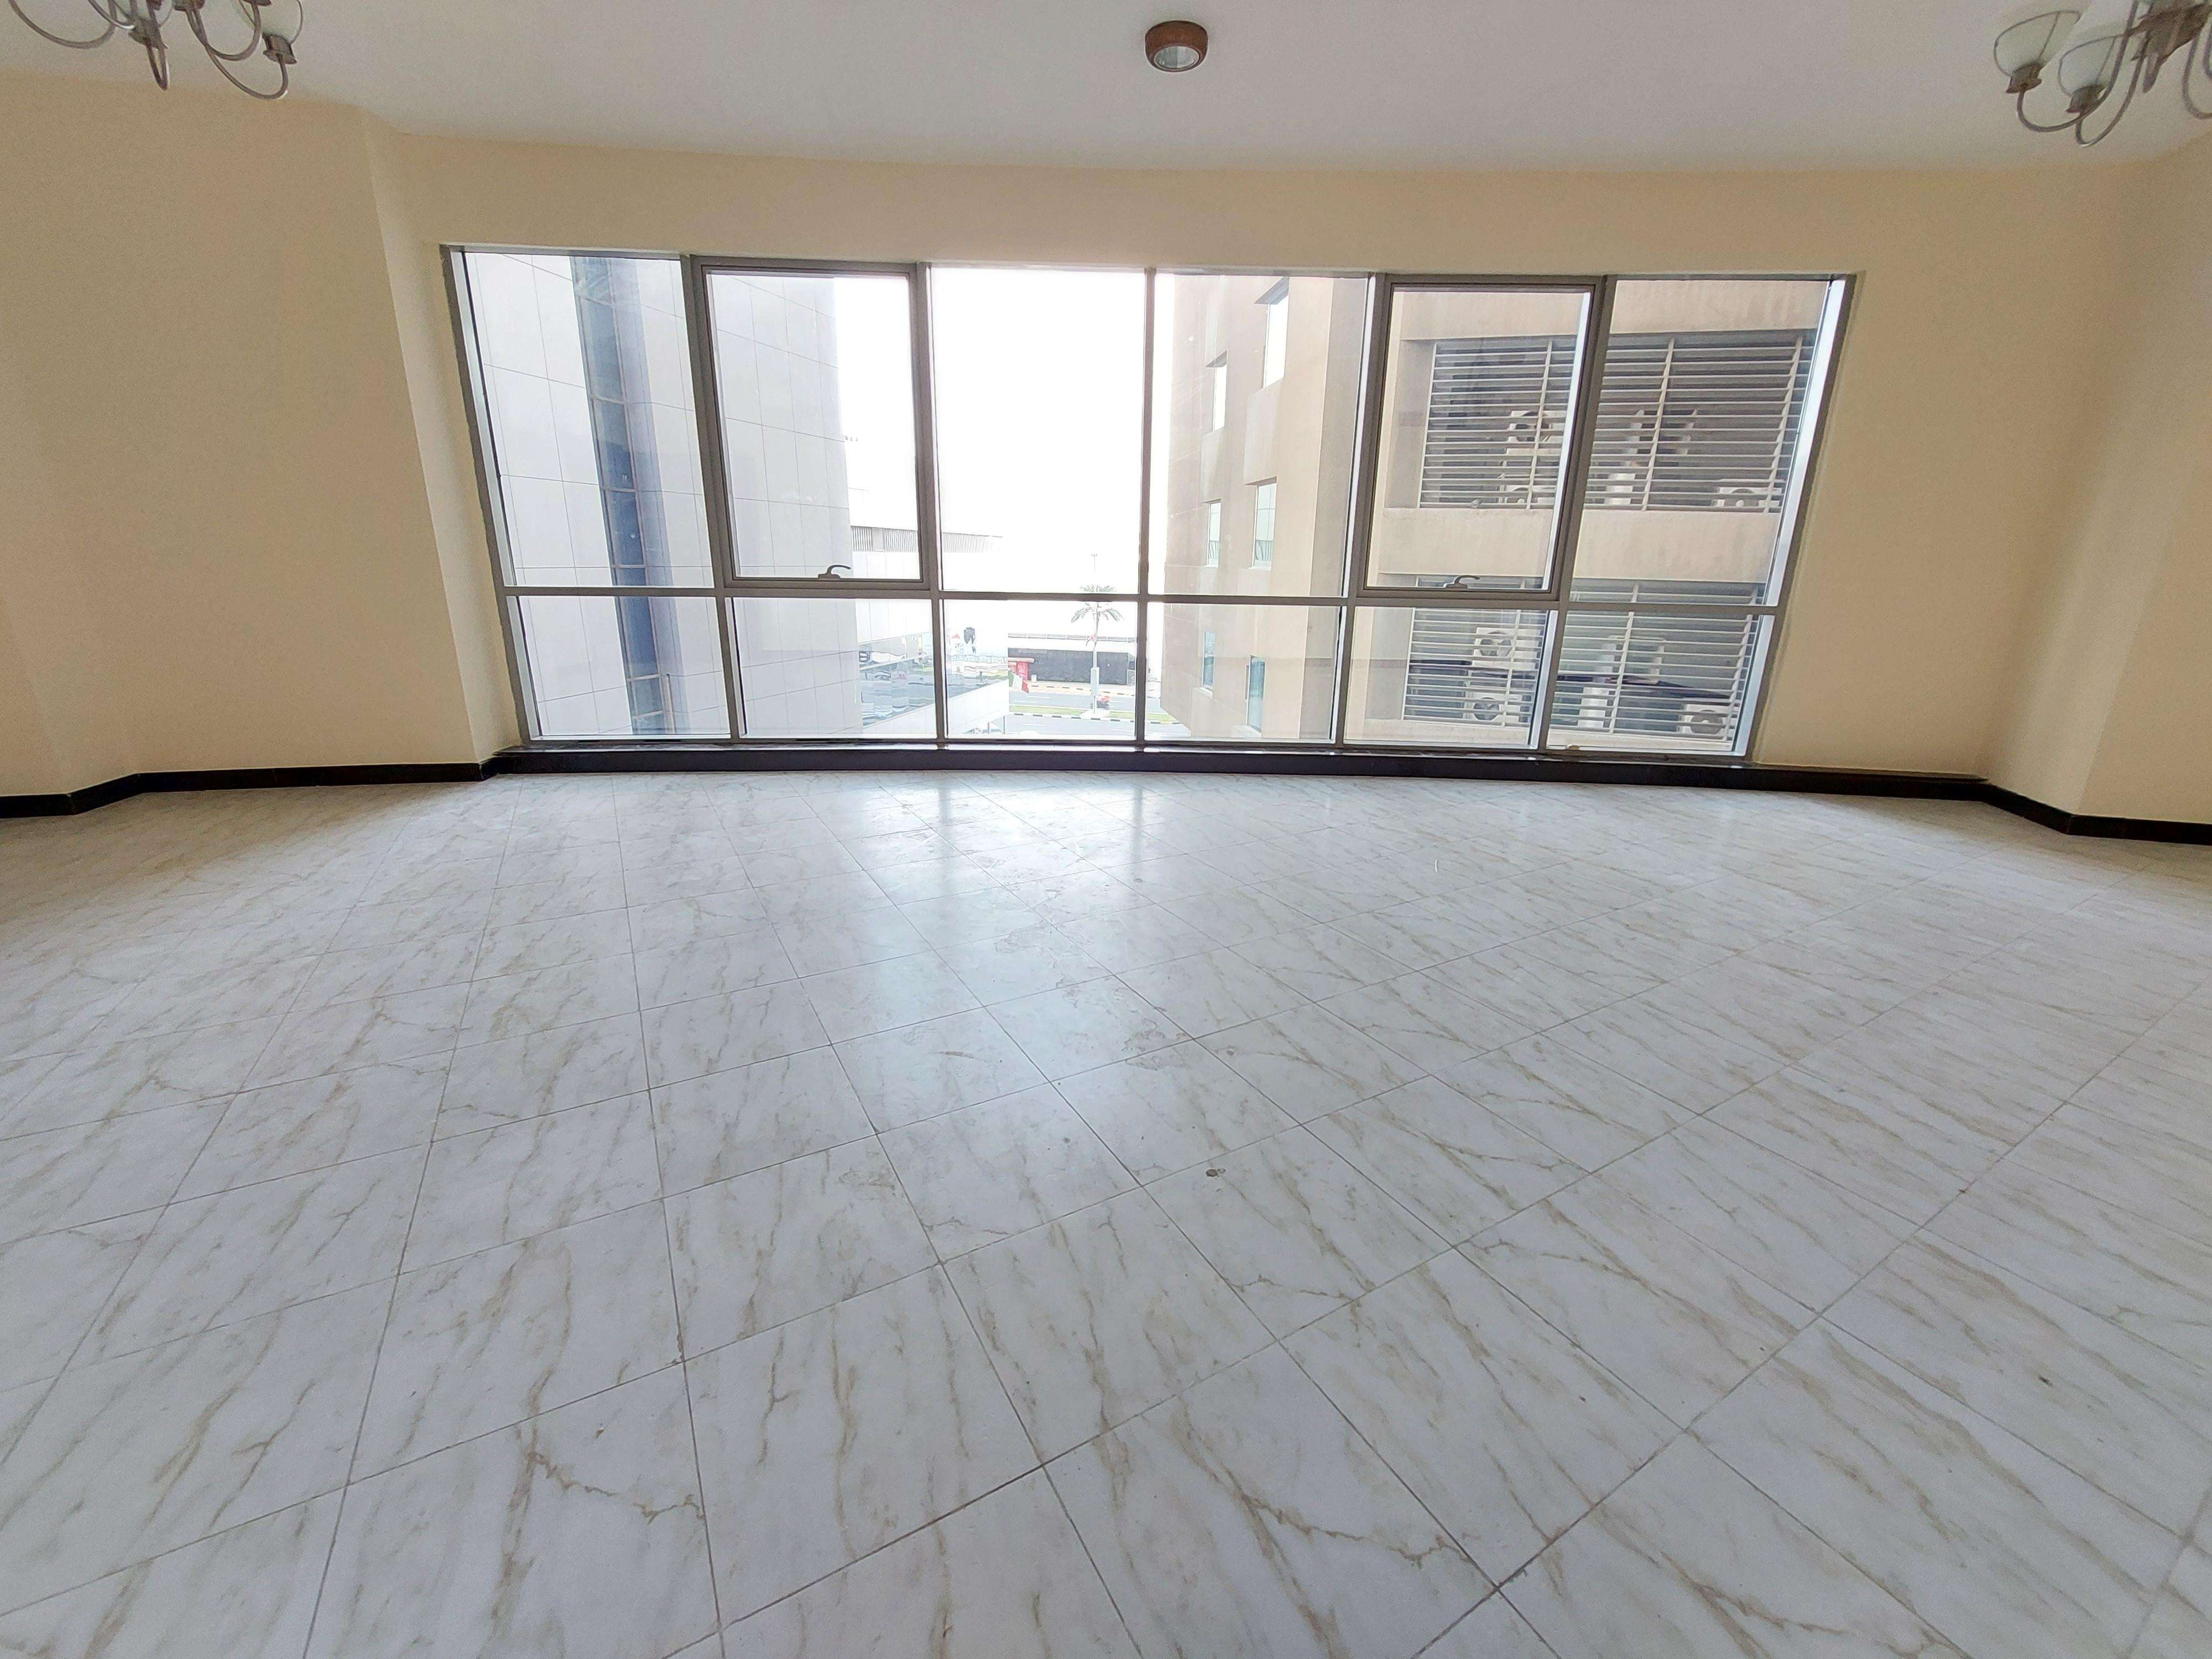 3 BR  Apartment For Rent in Al Majaz Tower